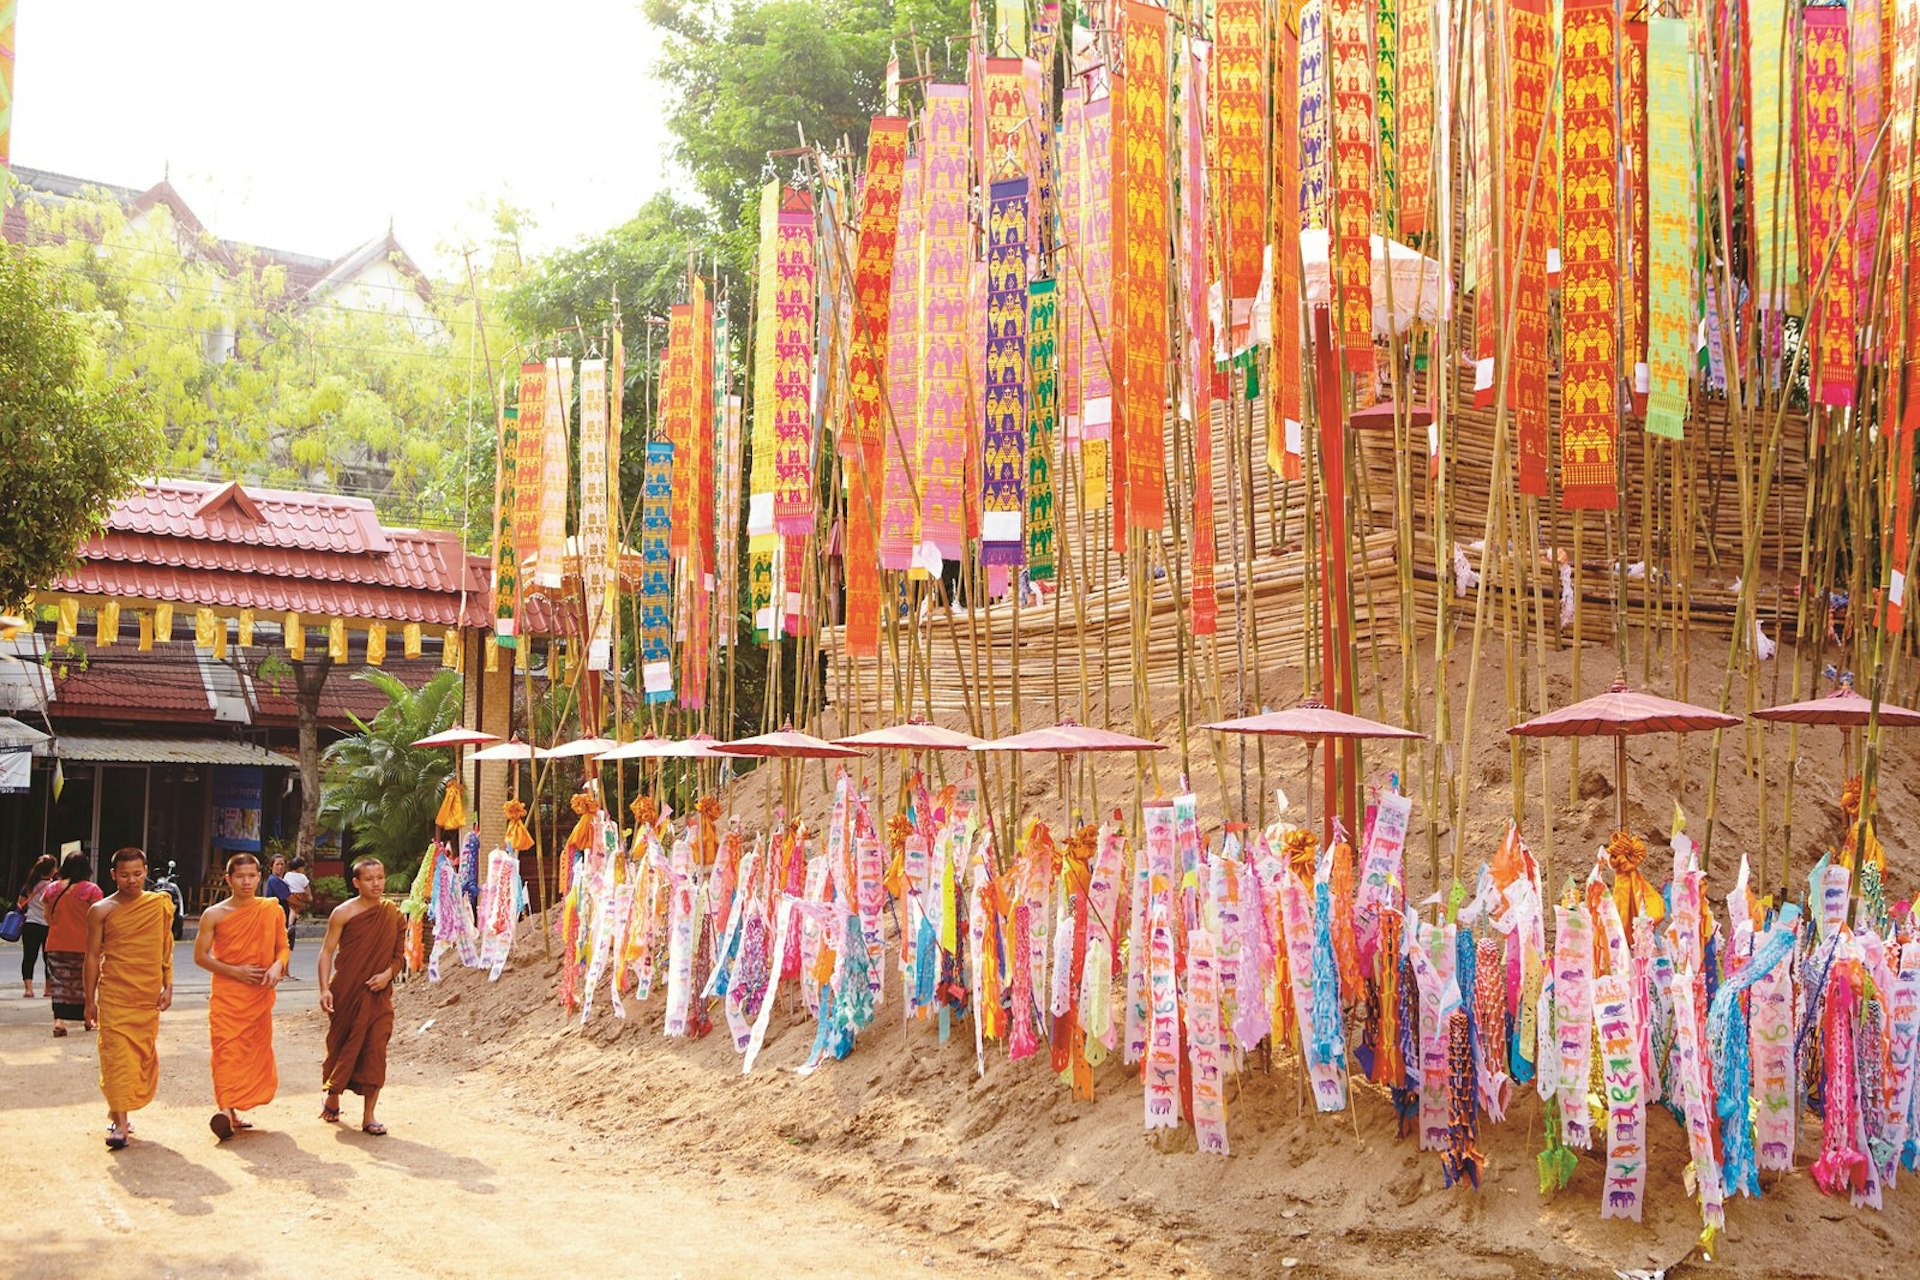 Two robe-clad monks walk past a sand pagoda decorated with colourful prayer flags © Matt Munro / Lonely Planet